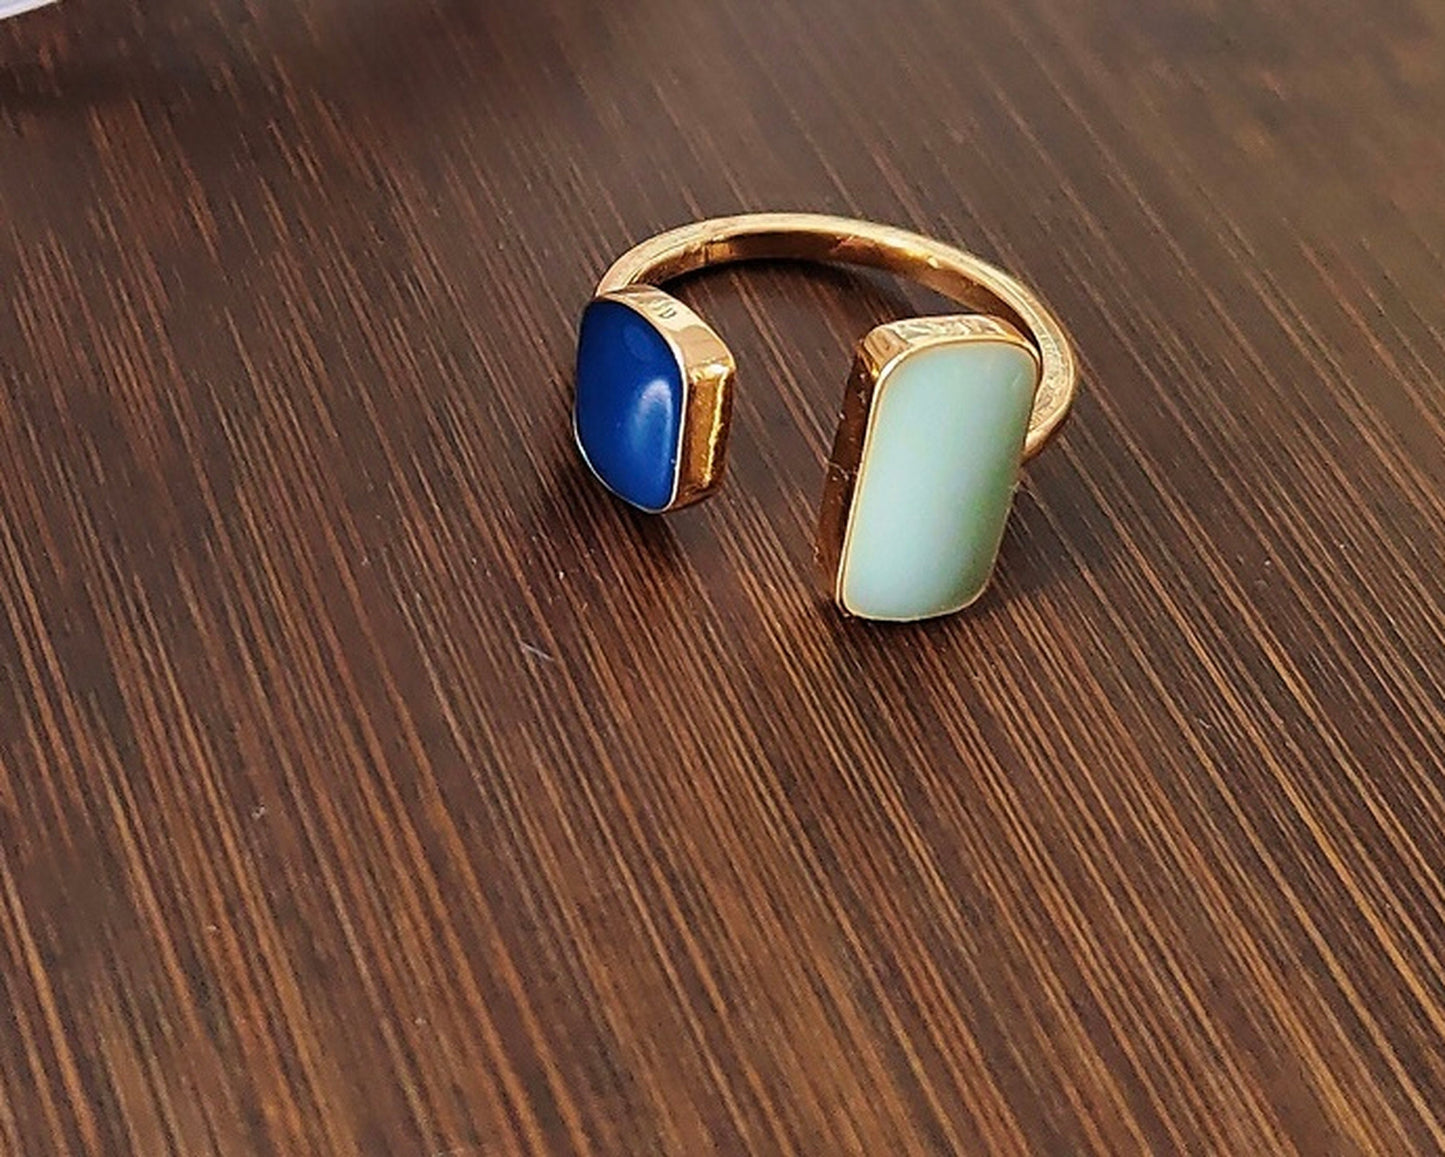 Geometric square signet ring, Blue rings, Avant Garde cocktail ring, Unisex mens rings, Gold open ring, Chunky rings, Unique birthday gift